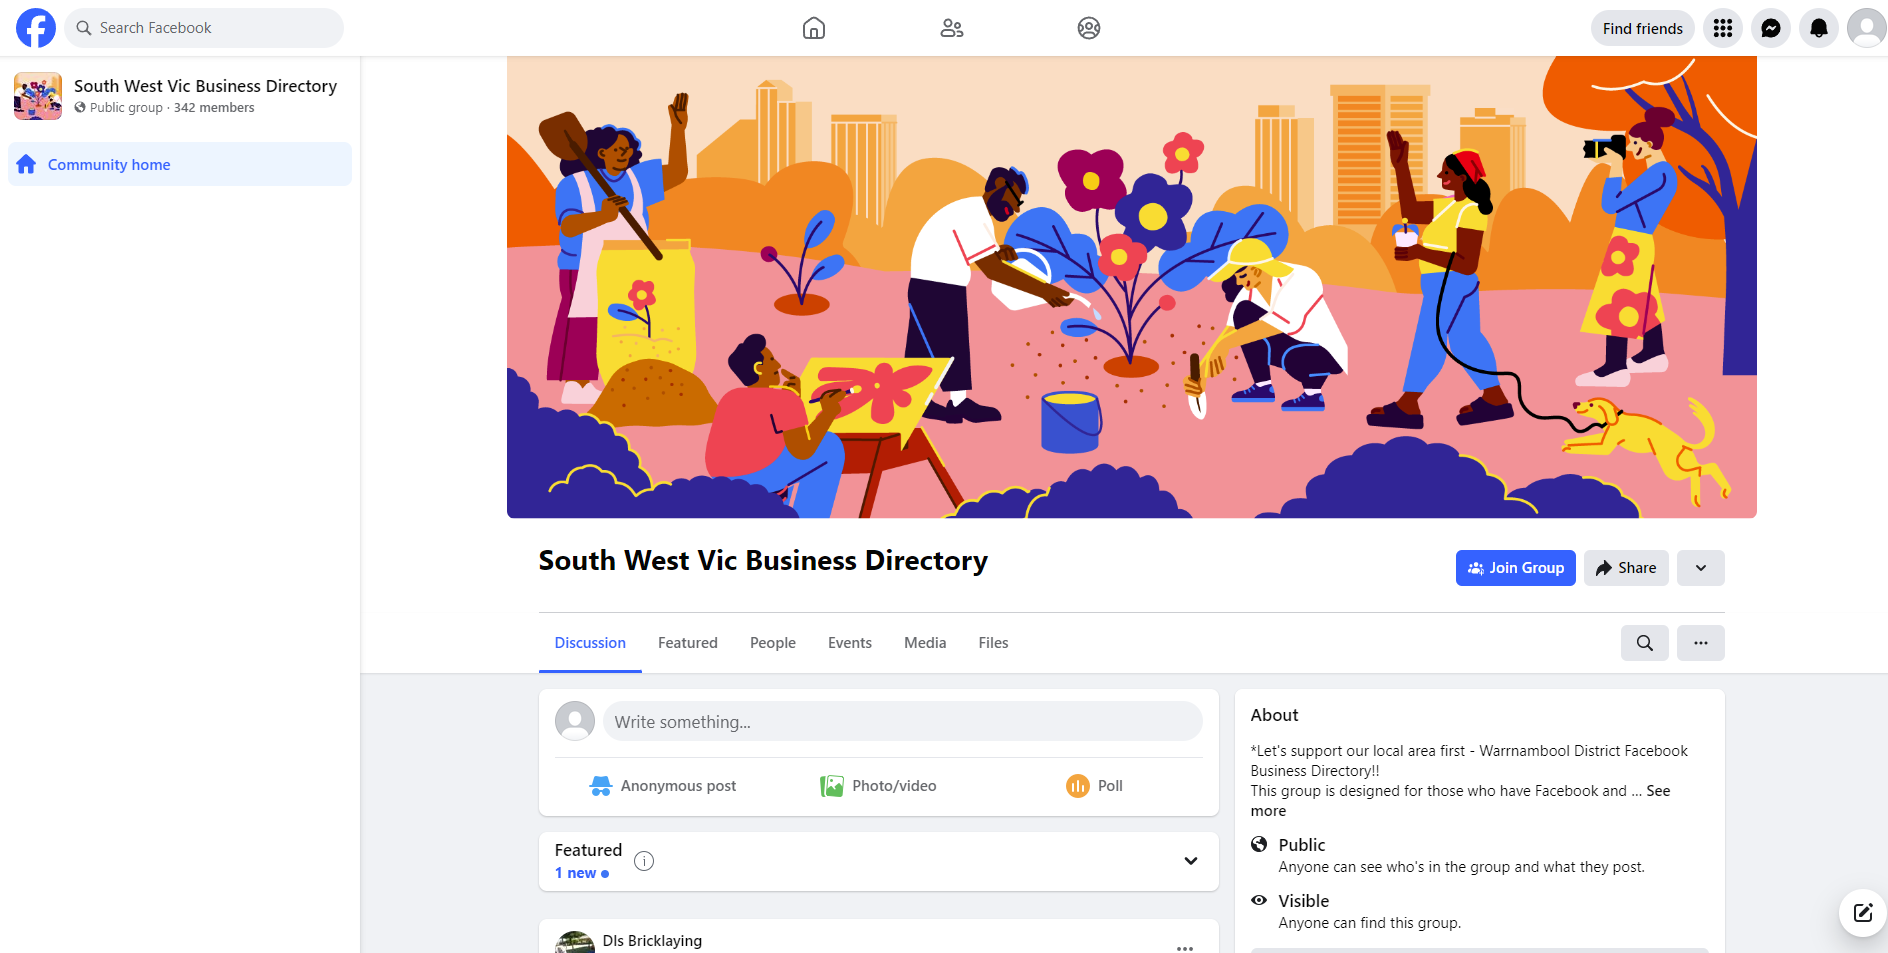 South West Vic Business Directory